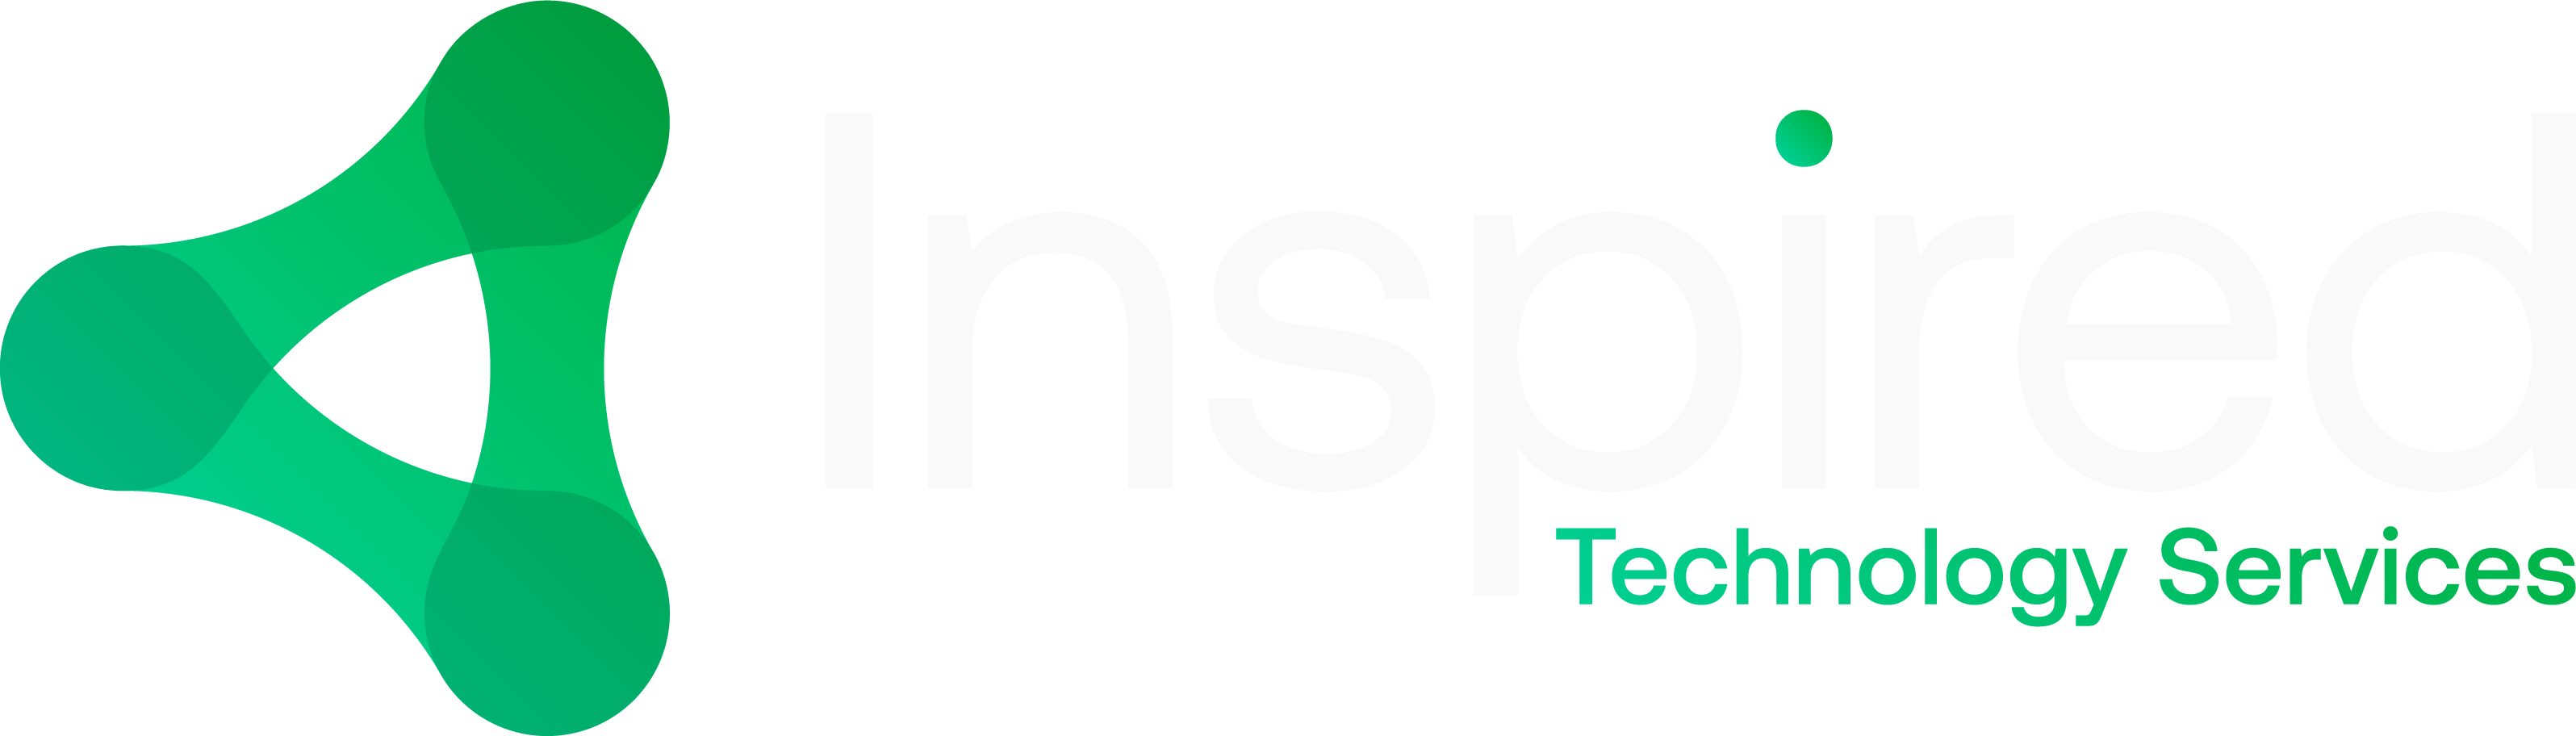 Inspired Technology Services